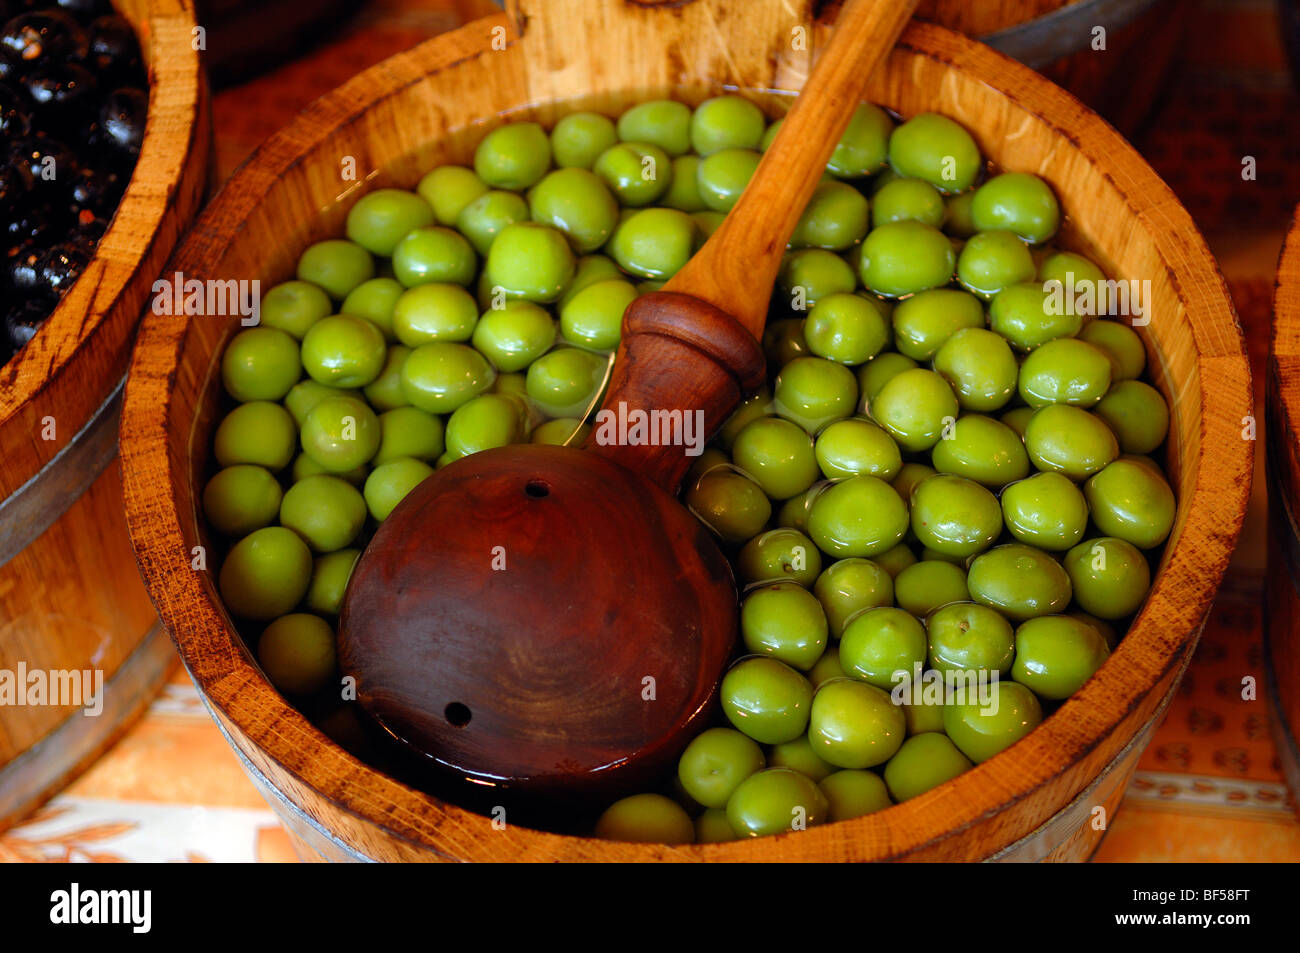 Green olives in a wooden tub with a wooden ladle, Borough Market, 8 Southwark Street, London, England, United Kingdom, Europe Stock Photo